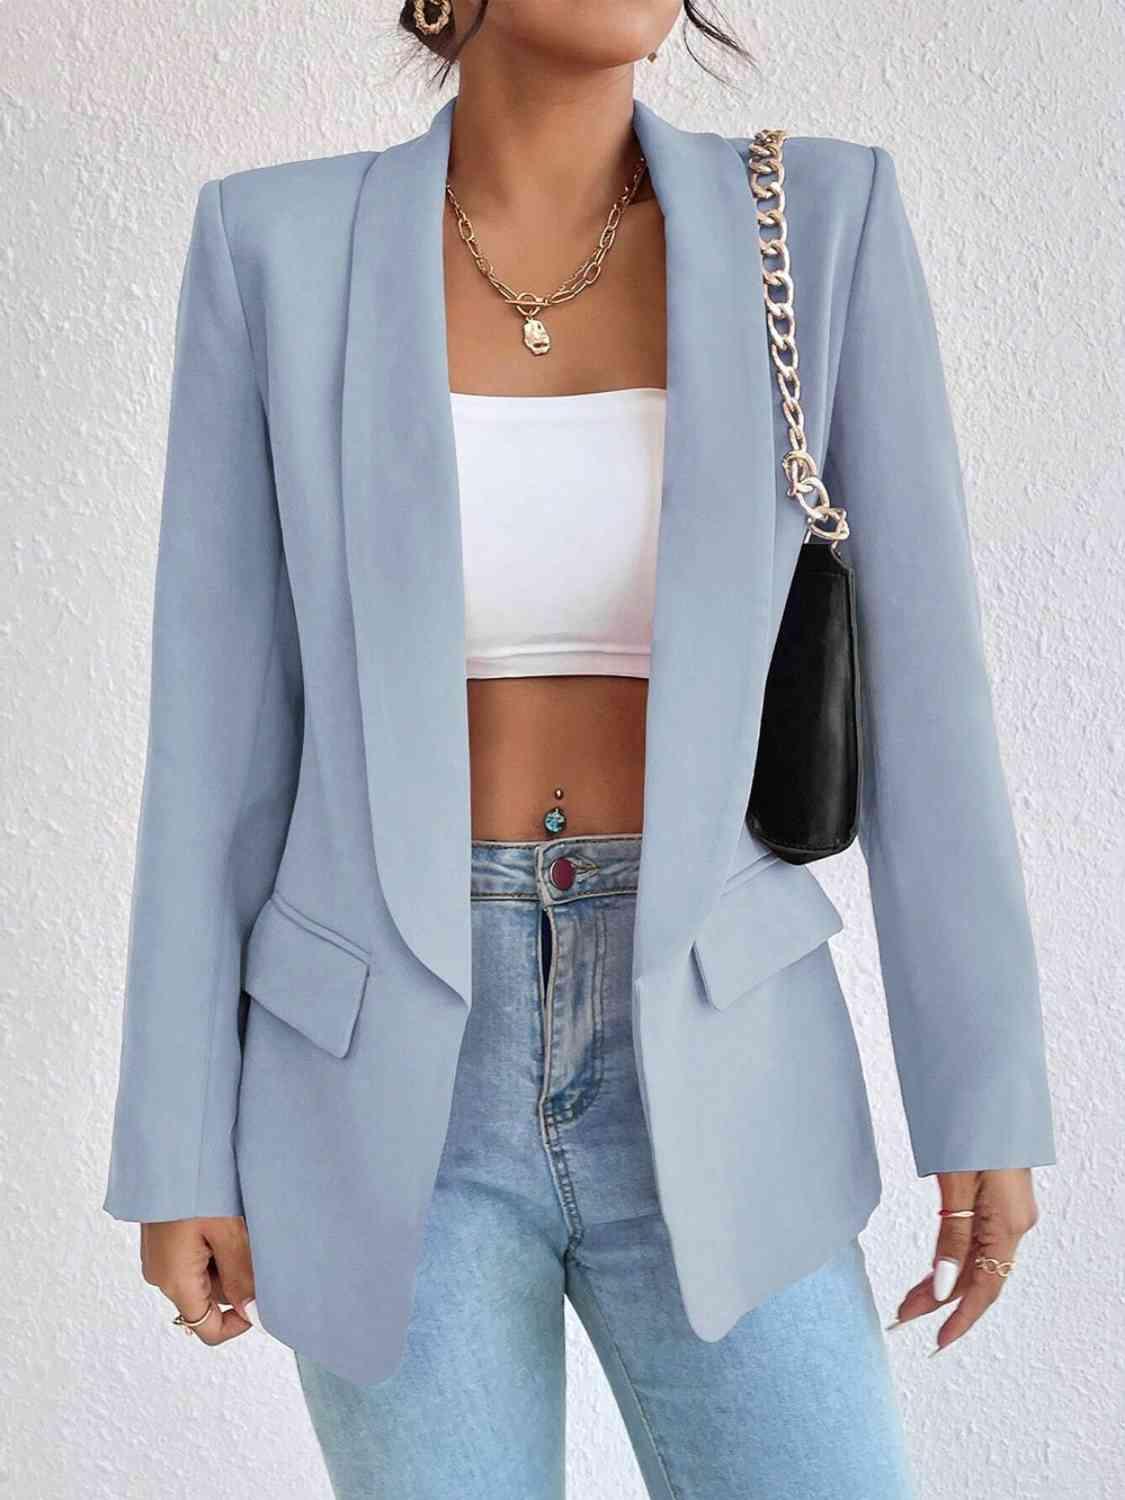 a woman wearing a light blue blazer and jeans